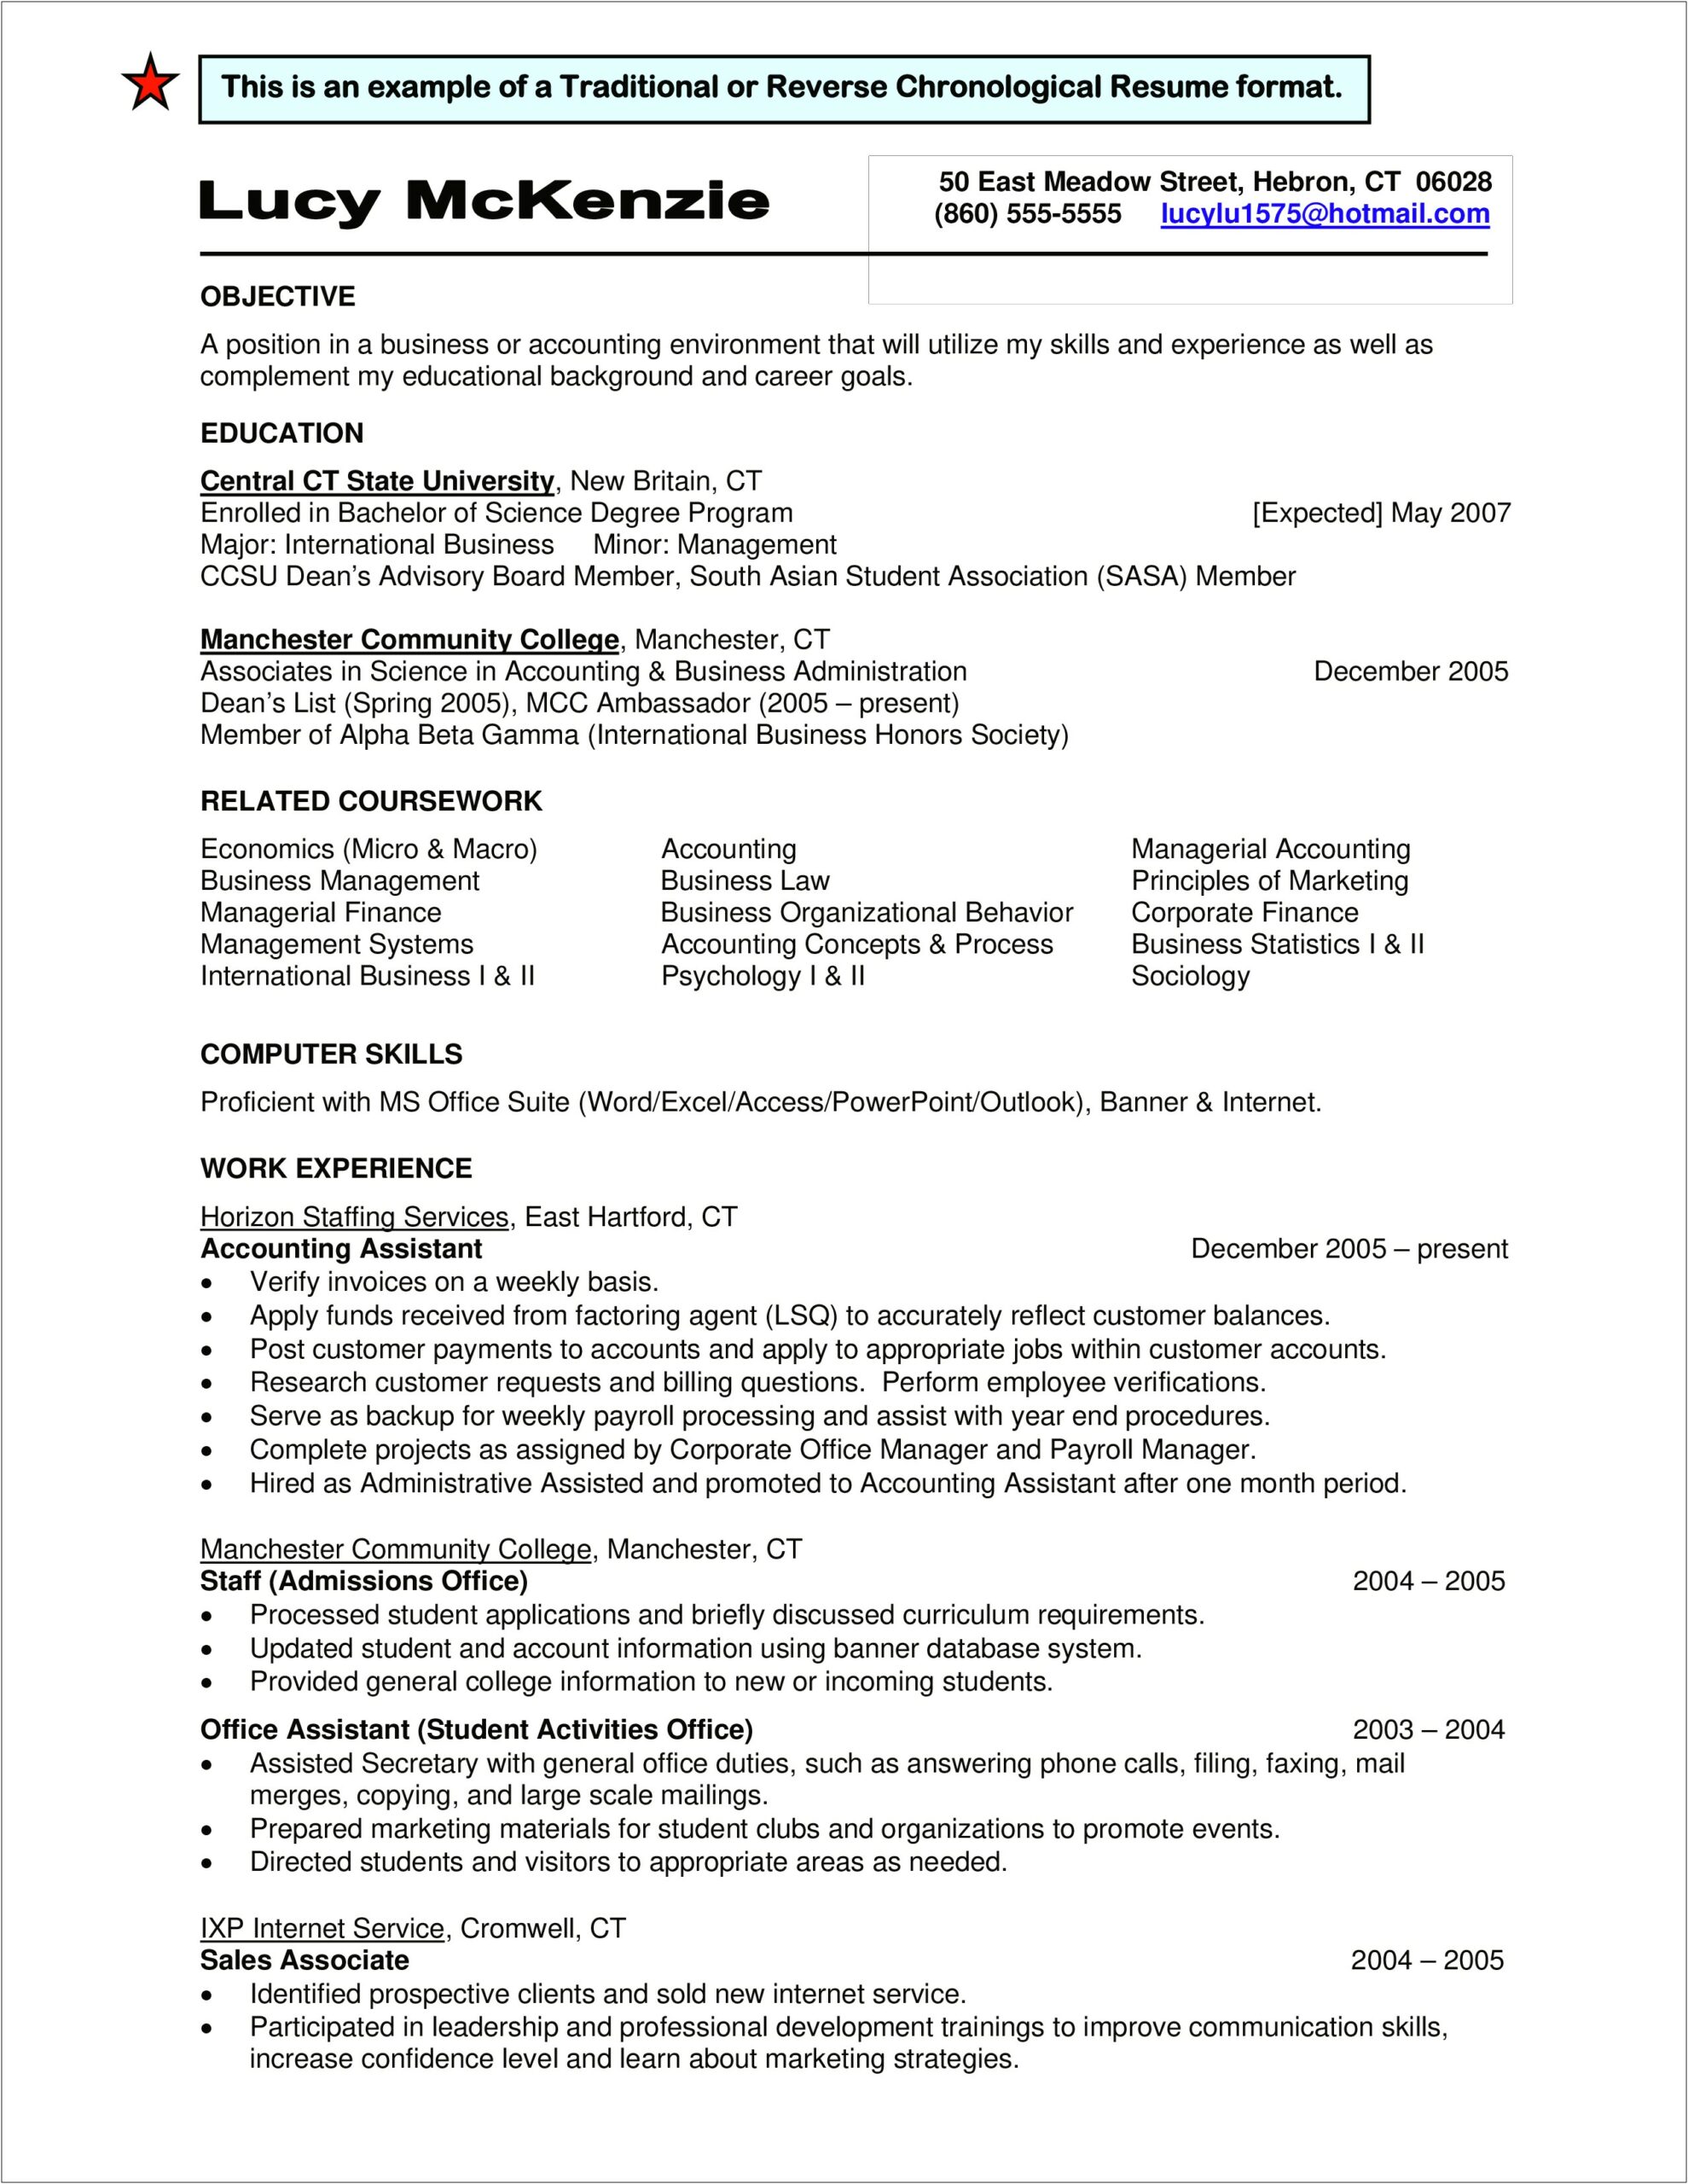 Resume Education Formatting Examples With A Minor